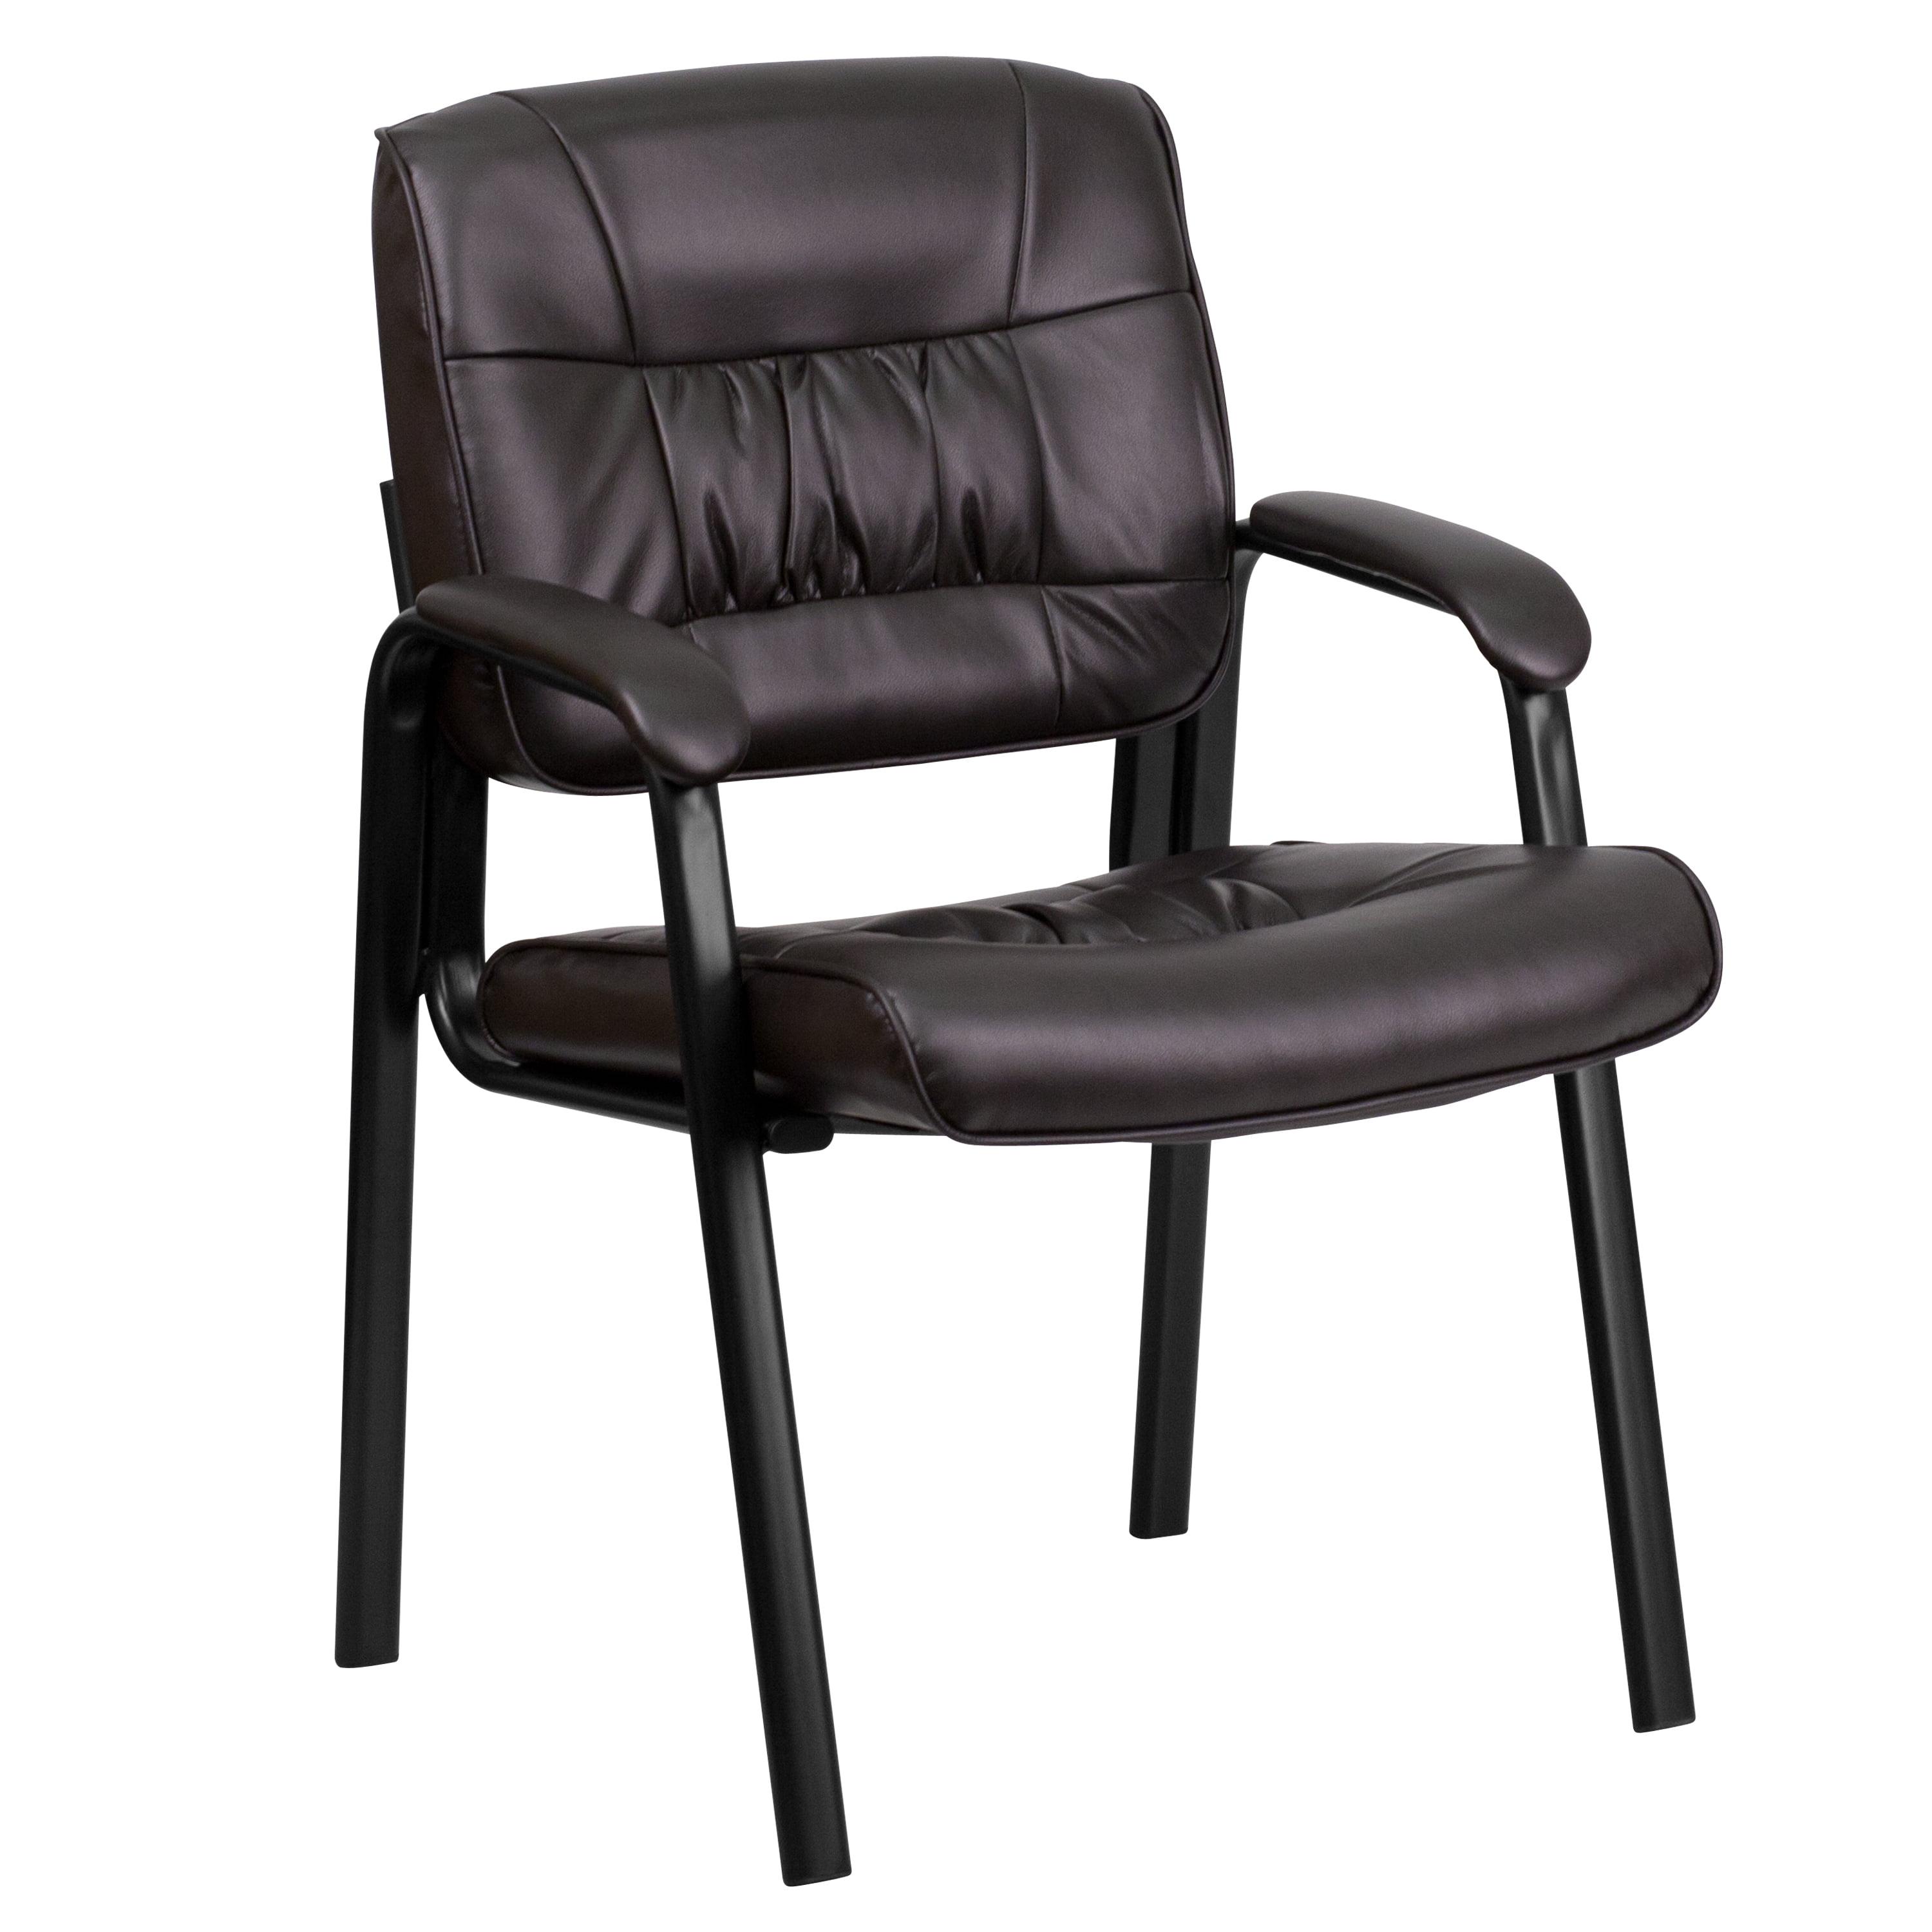 Ergonomic Brown LeatherSoft Executive Chair with Metal Frame